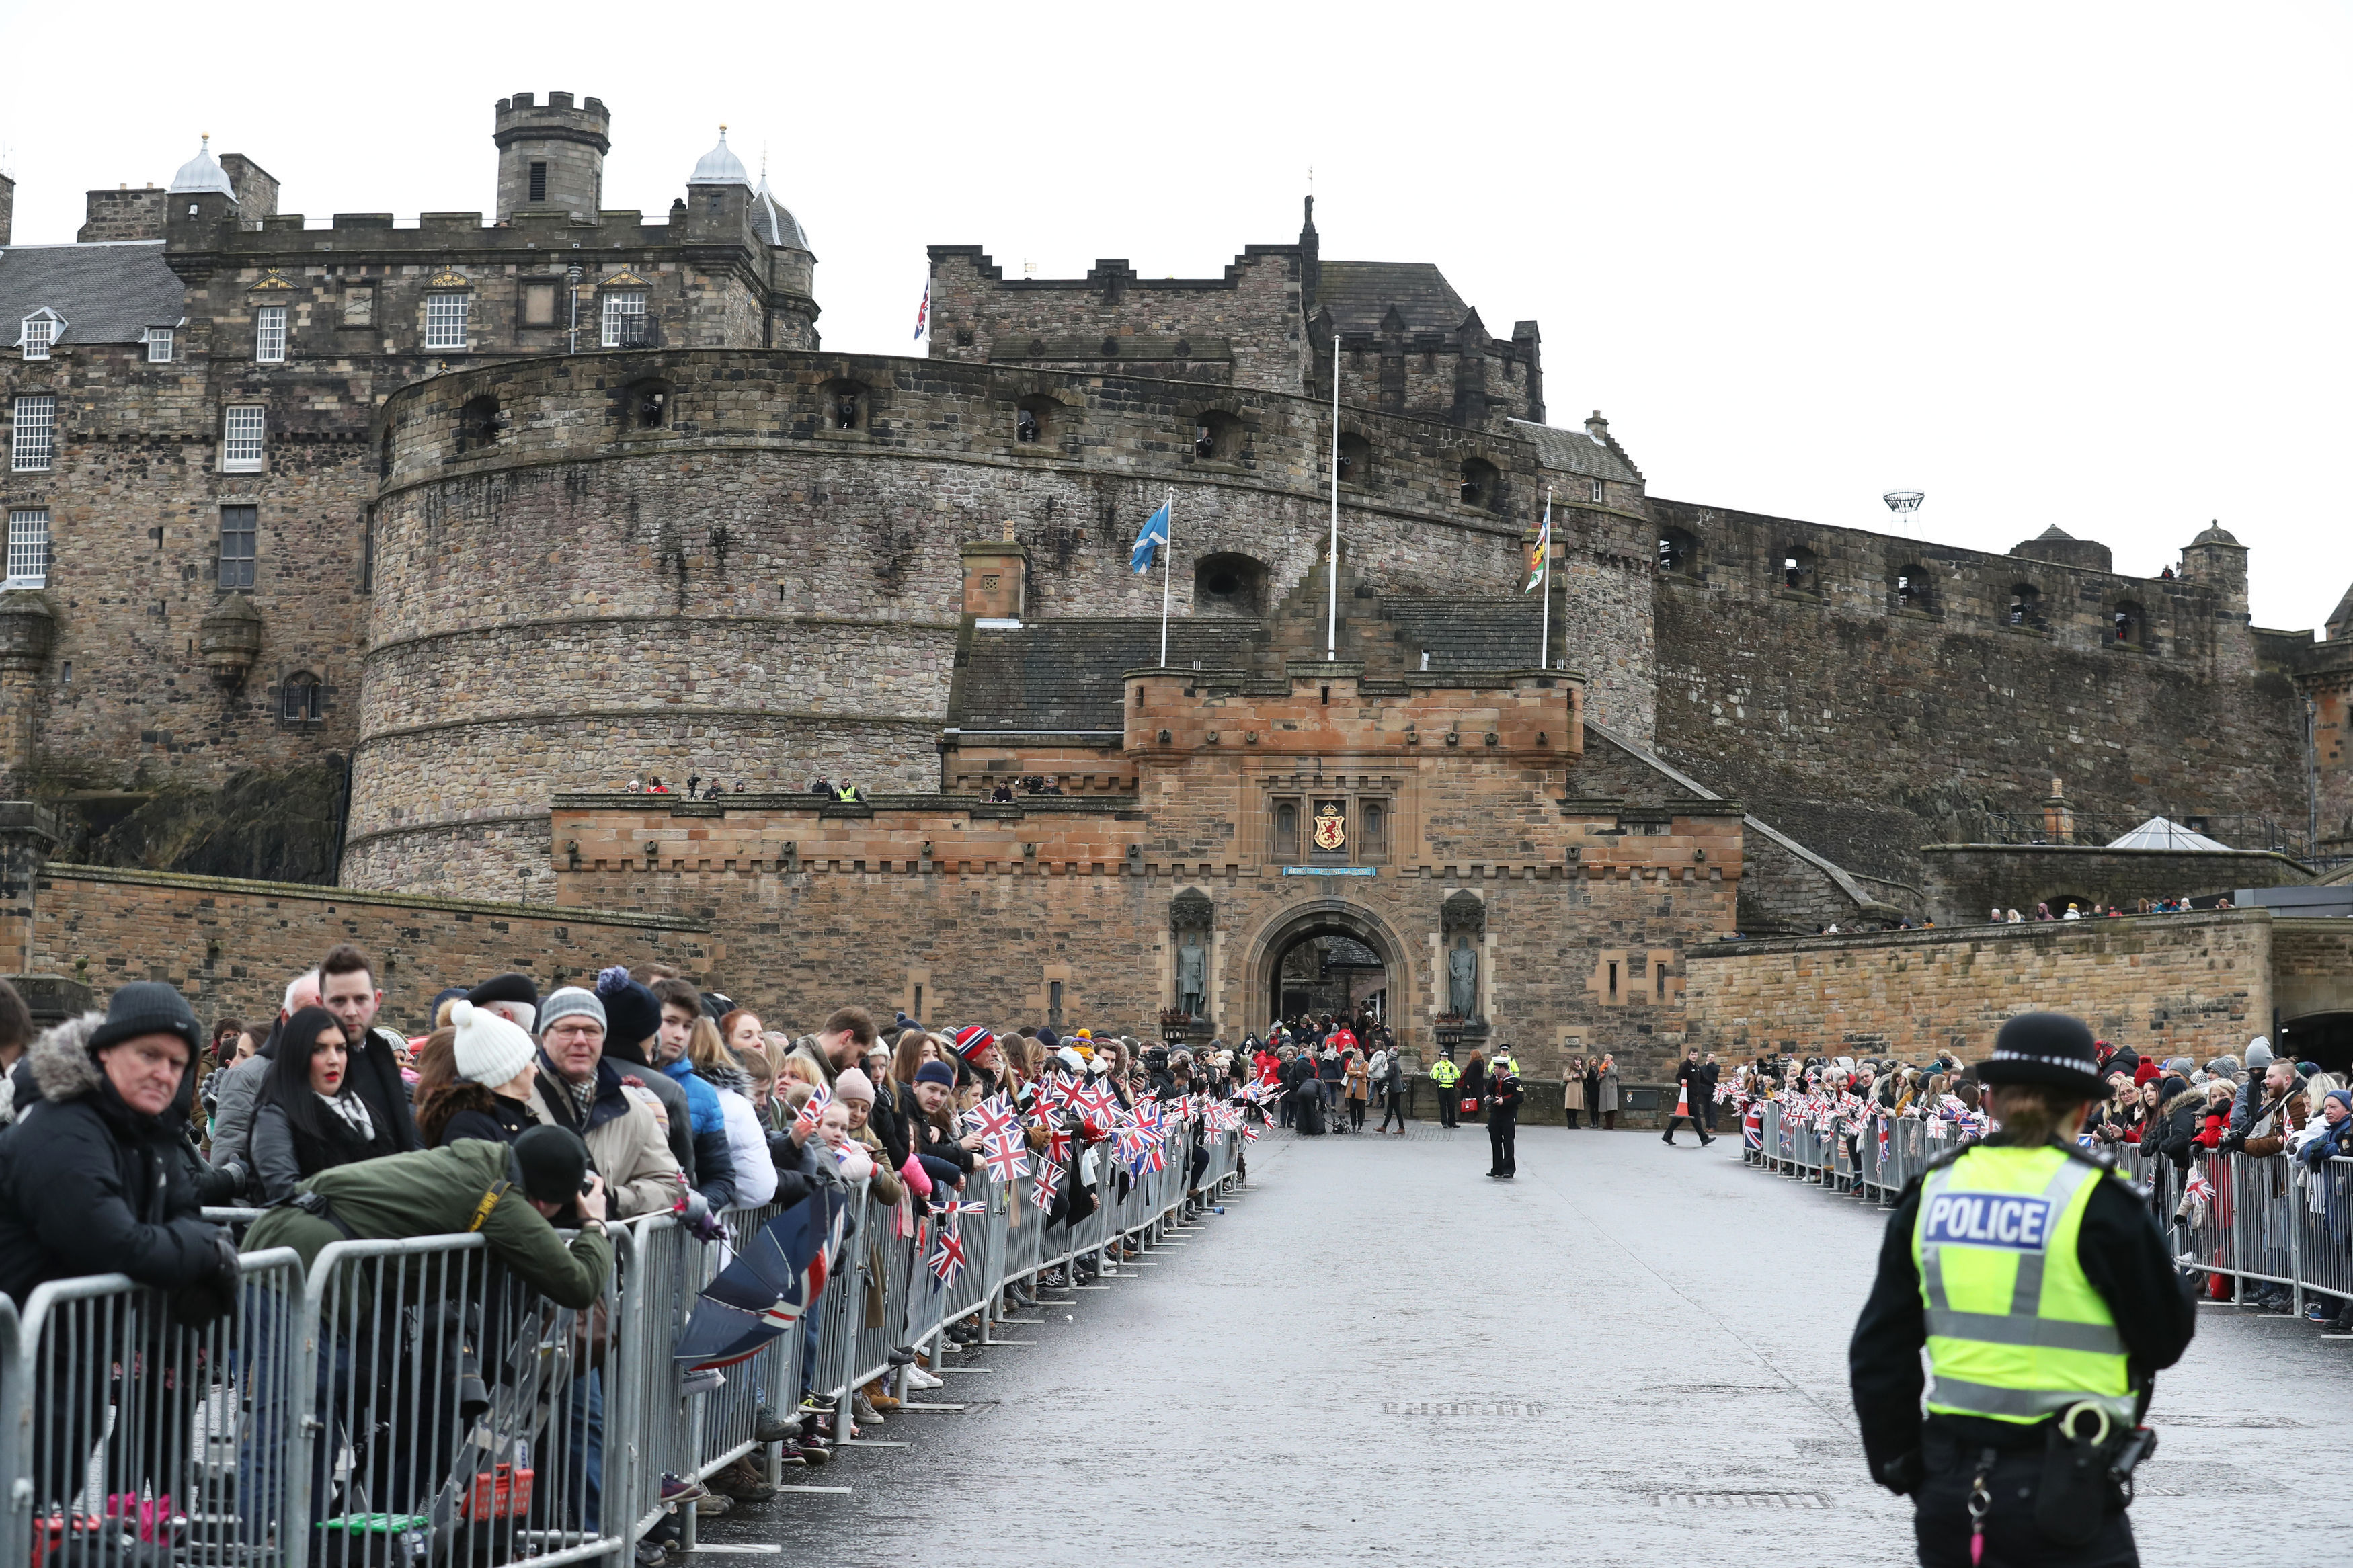 Crowds gather ahead of a visit by Prince Harry and Meghan Markle to Edinburgh Castle (Andrew Milligan/PA)